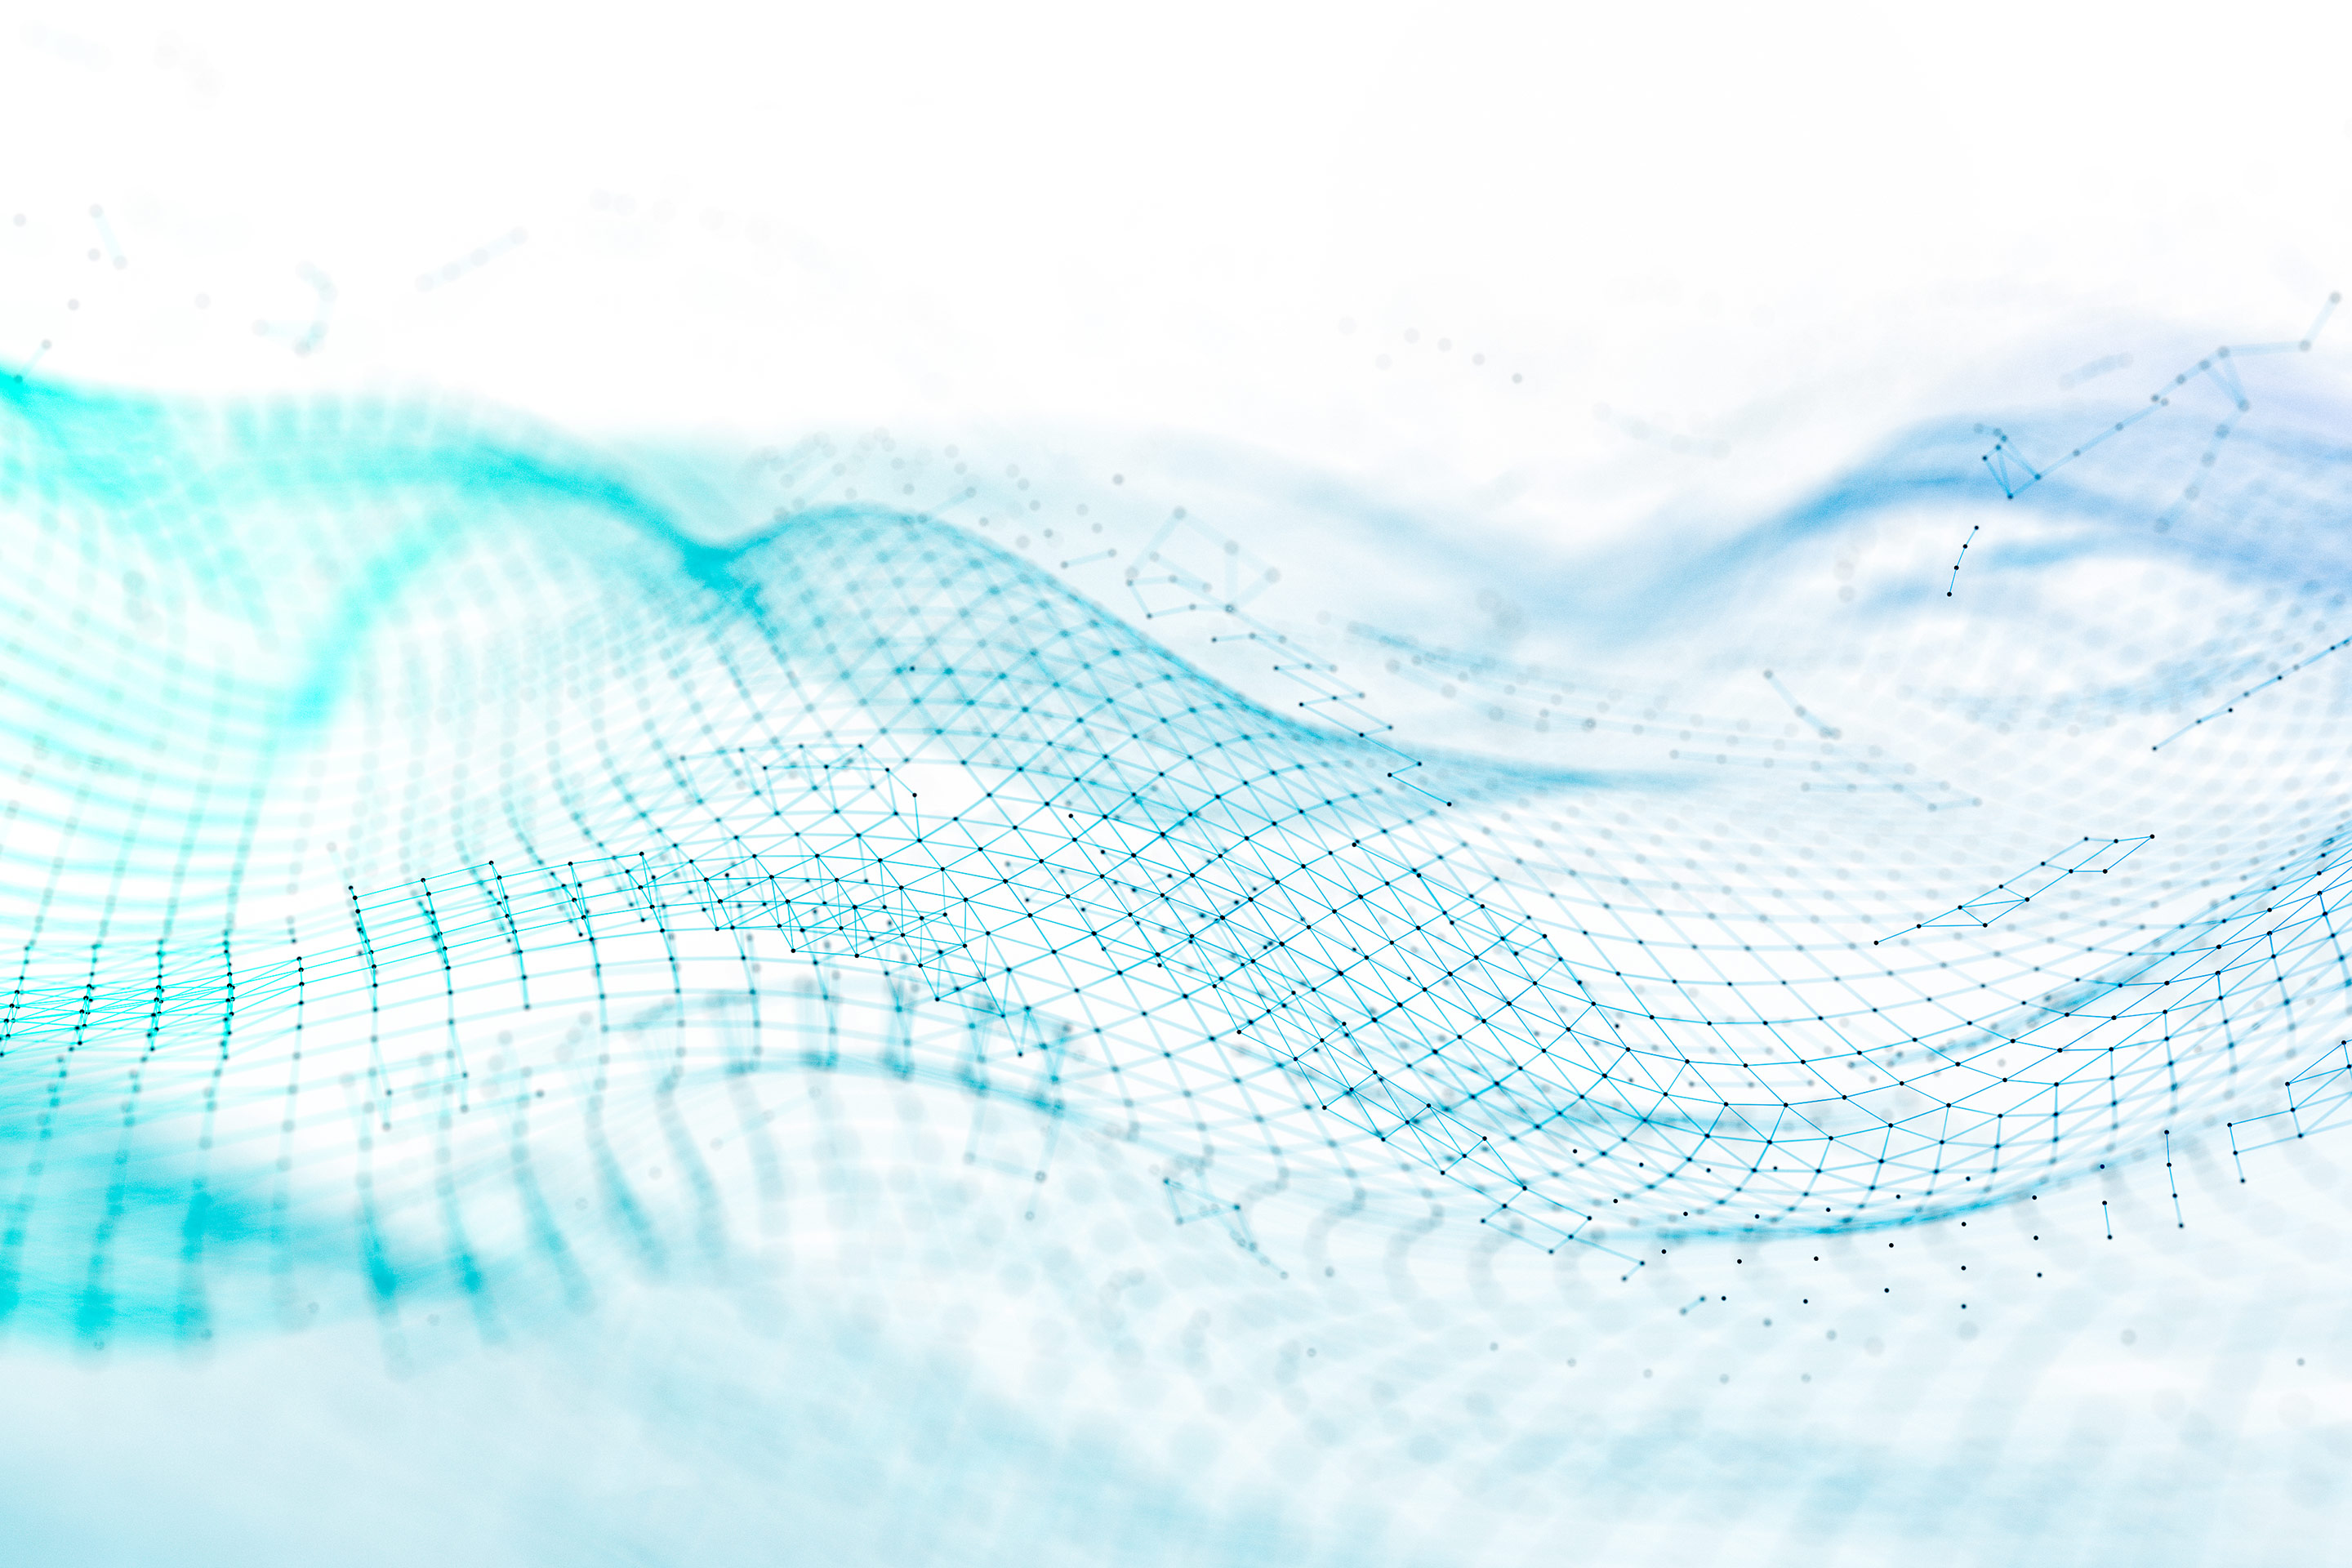 Waves of data in bright turquoise flow across a white background representing an ecosystem and engagement